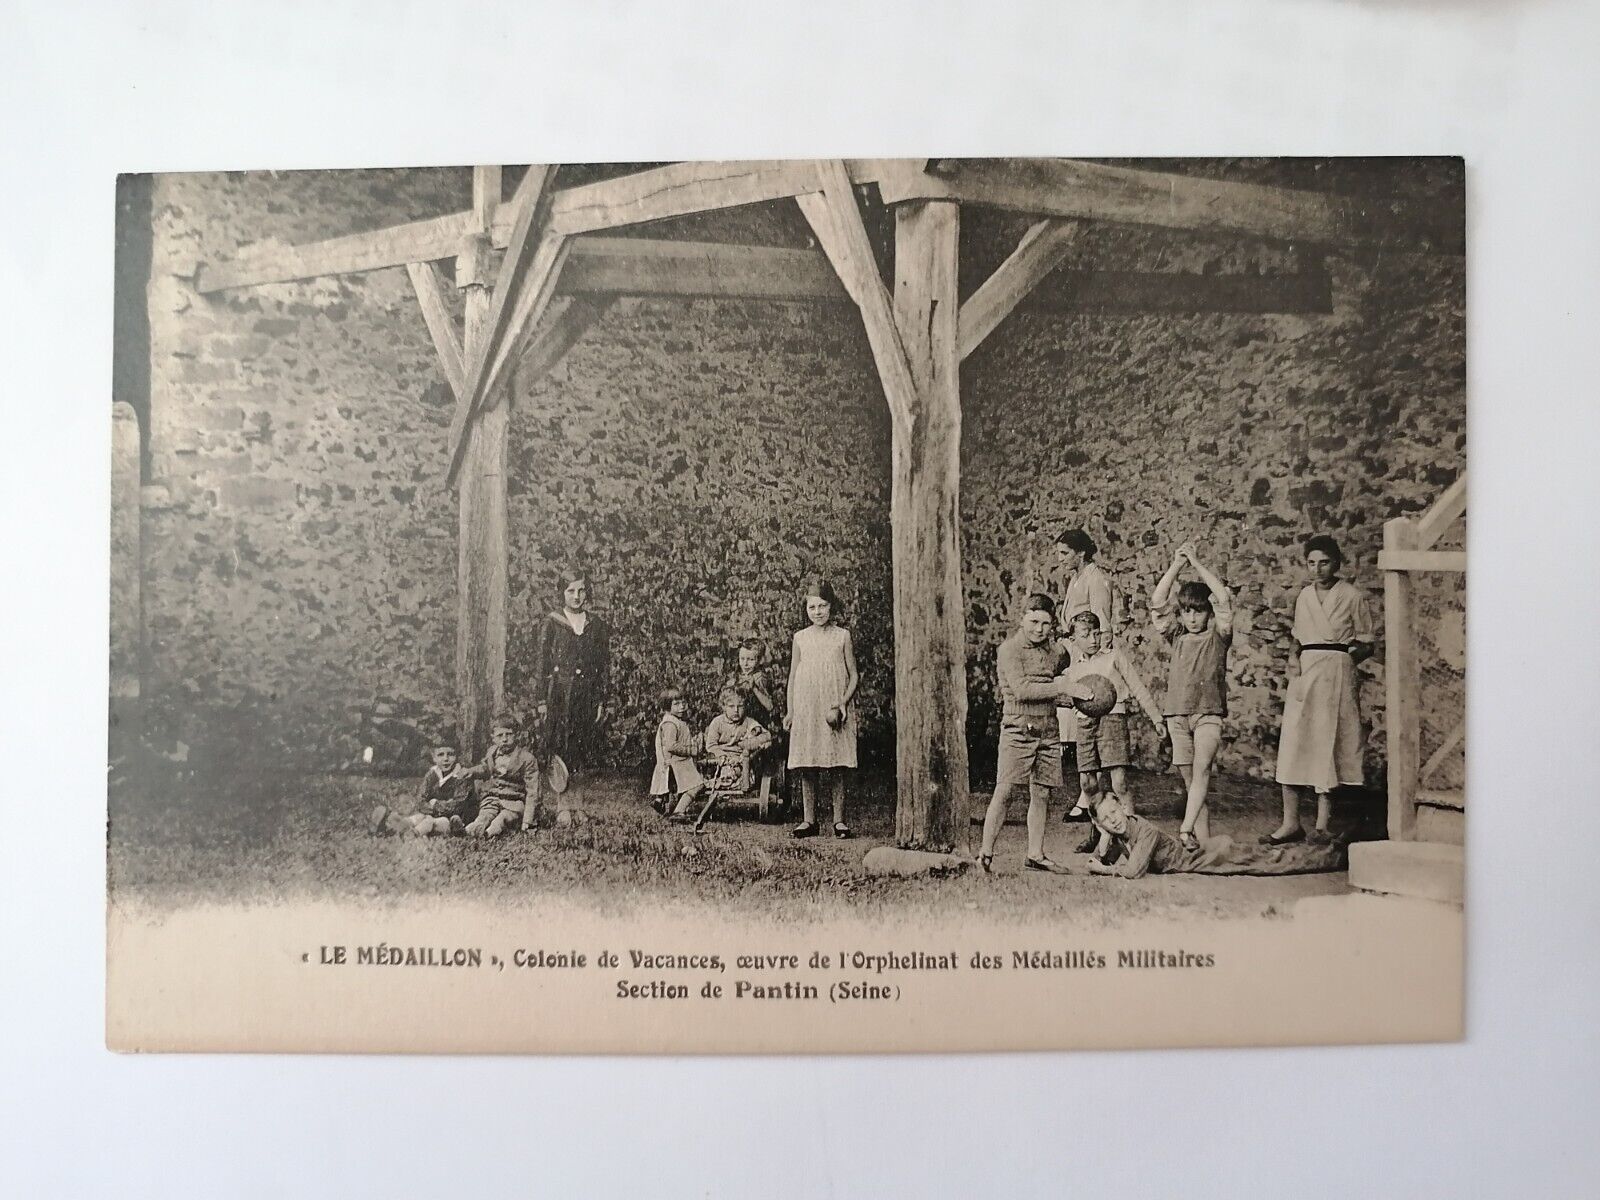 cpa PANTIN LE MEDALLILLON Orphanage of Military Medalists Children, ball games